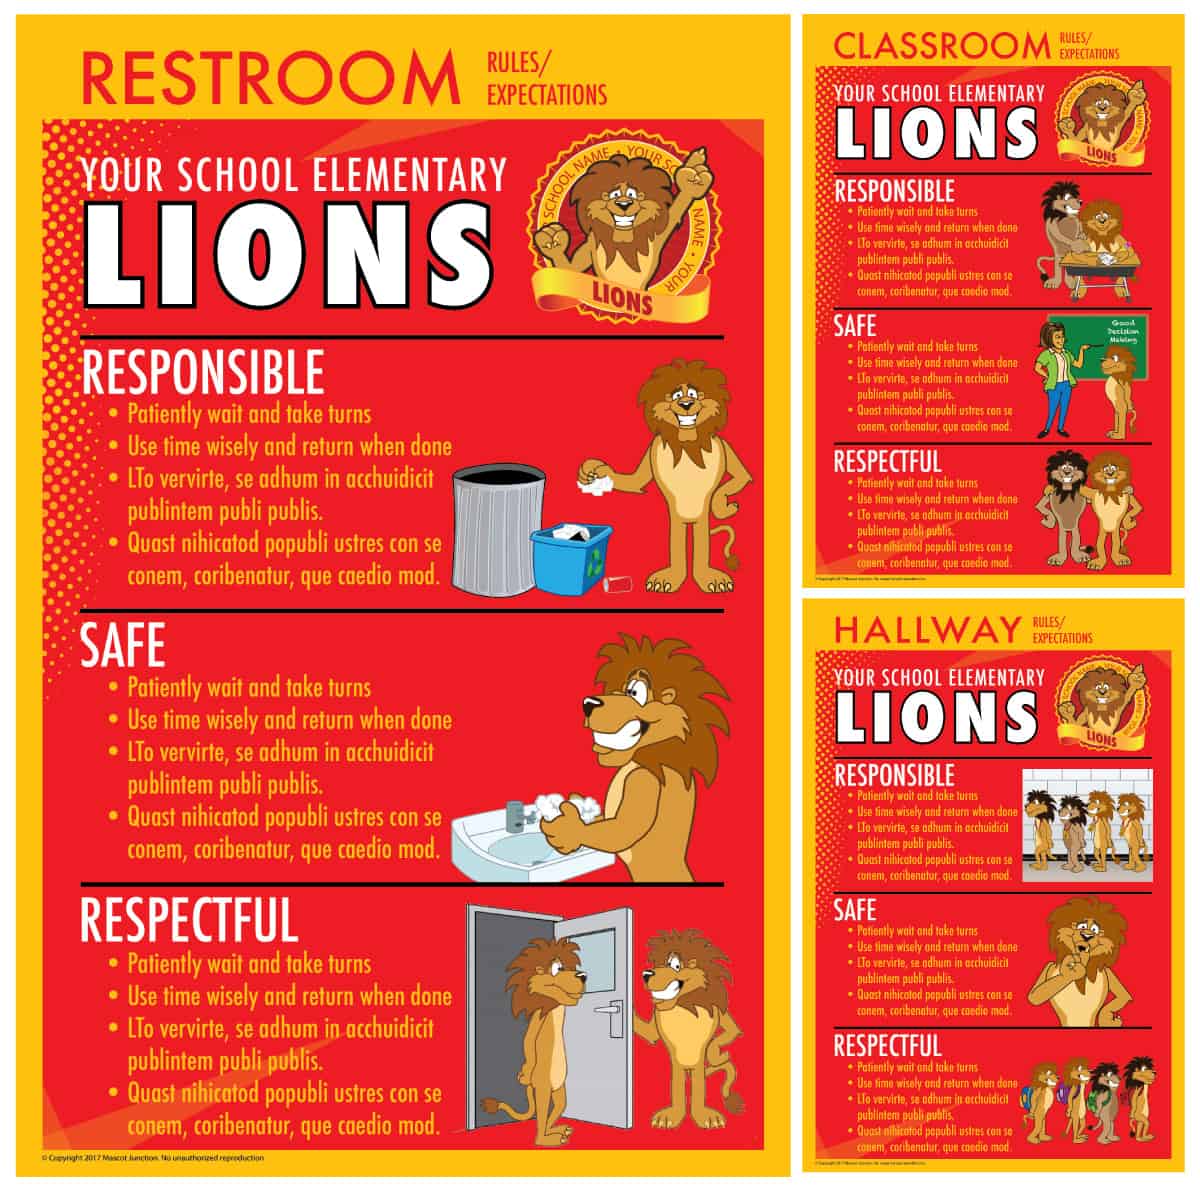 Rules-posters_lion